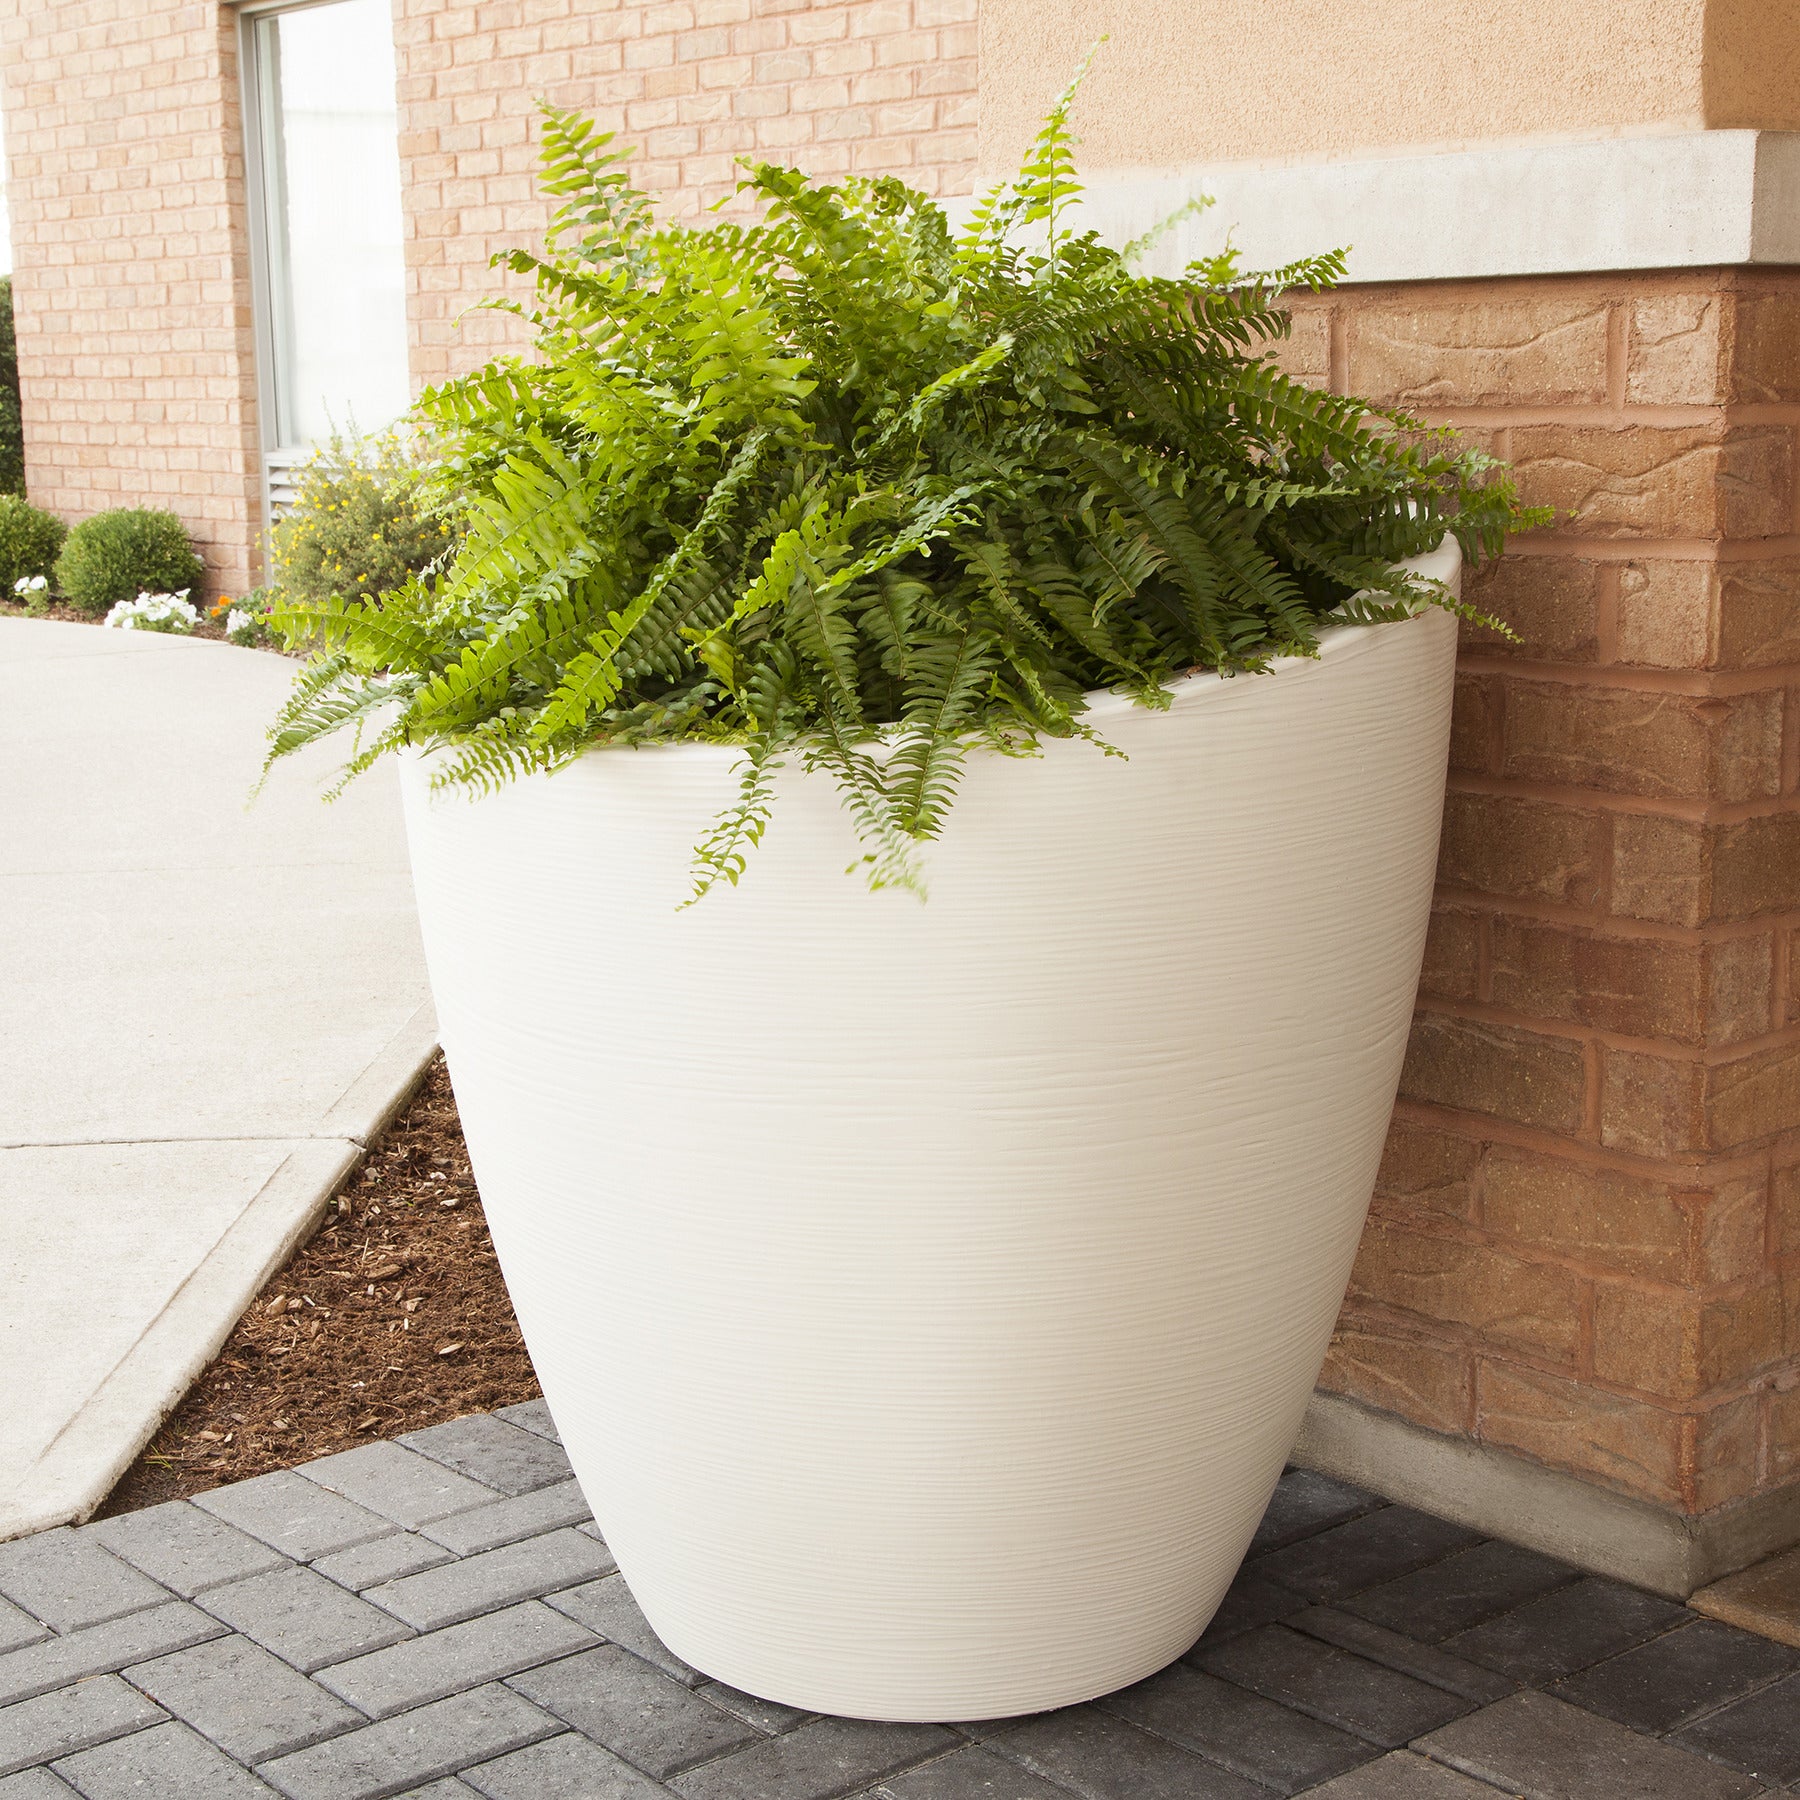 Mayne Modesto Round Planter with Sloped Top and Textured Finish - Senior.com Planters